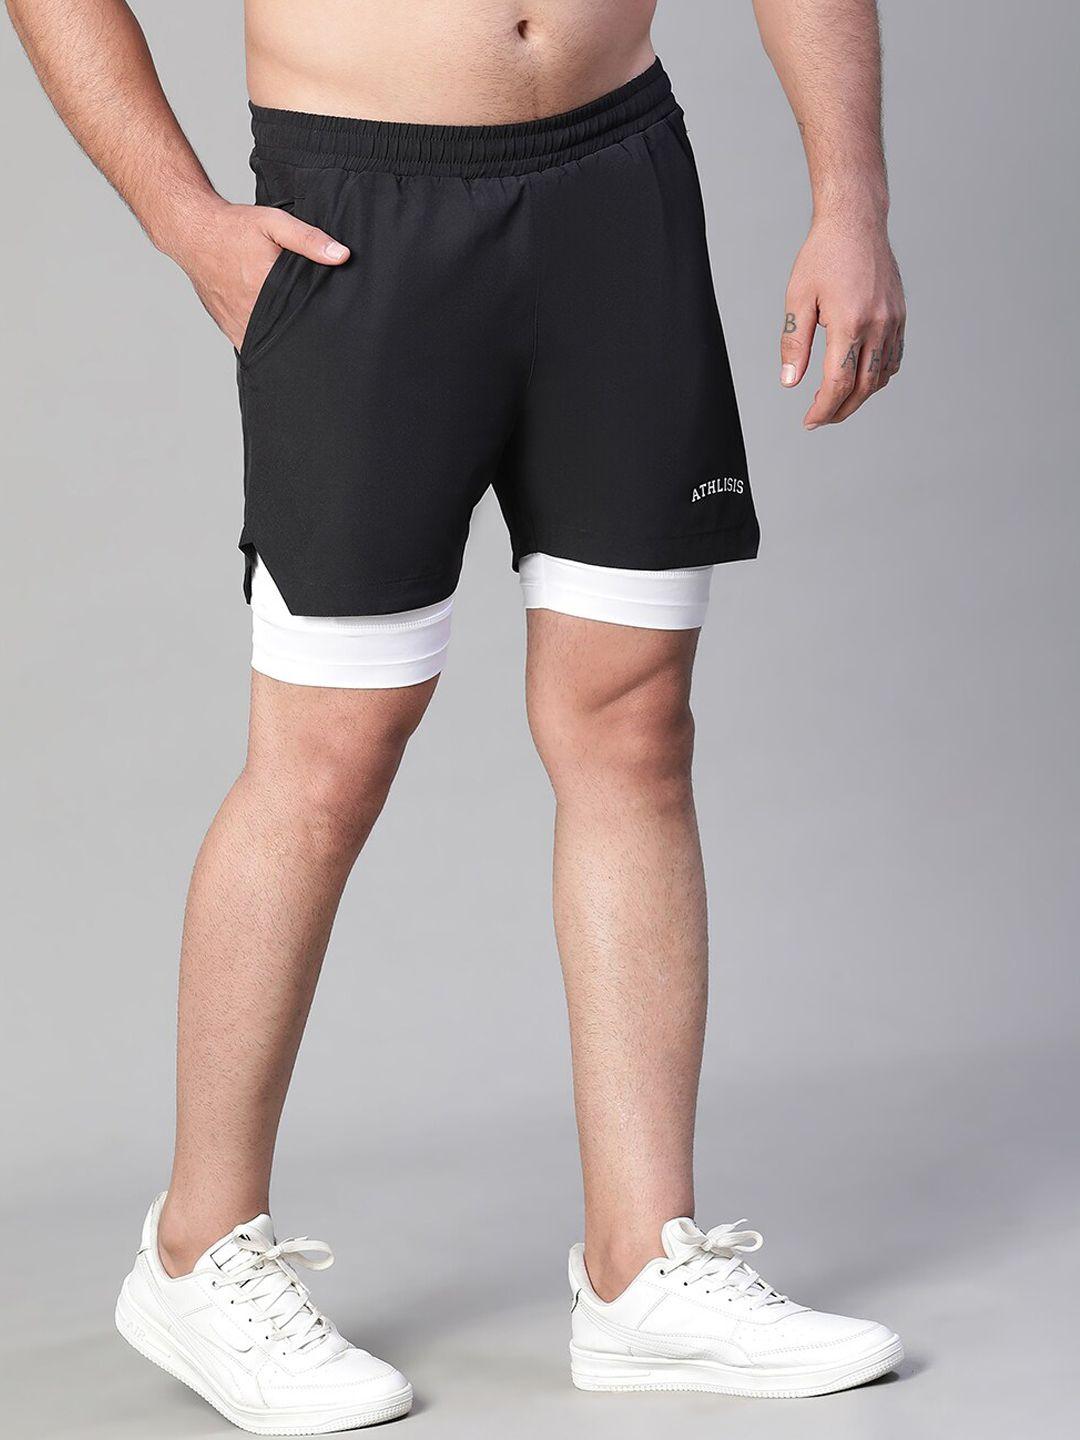 athlisis-e-dry-technology-mid-rise-slim-fit-sports-shorts